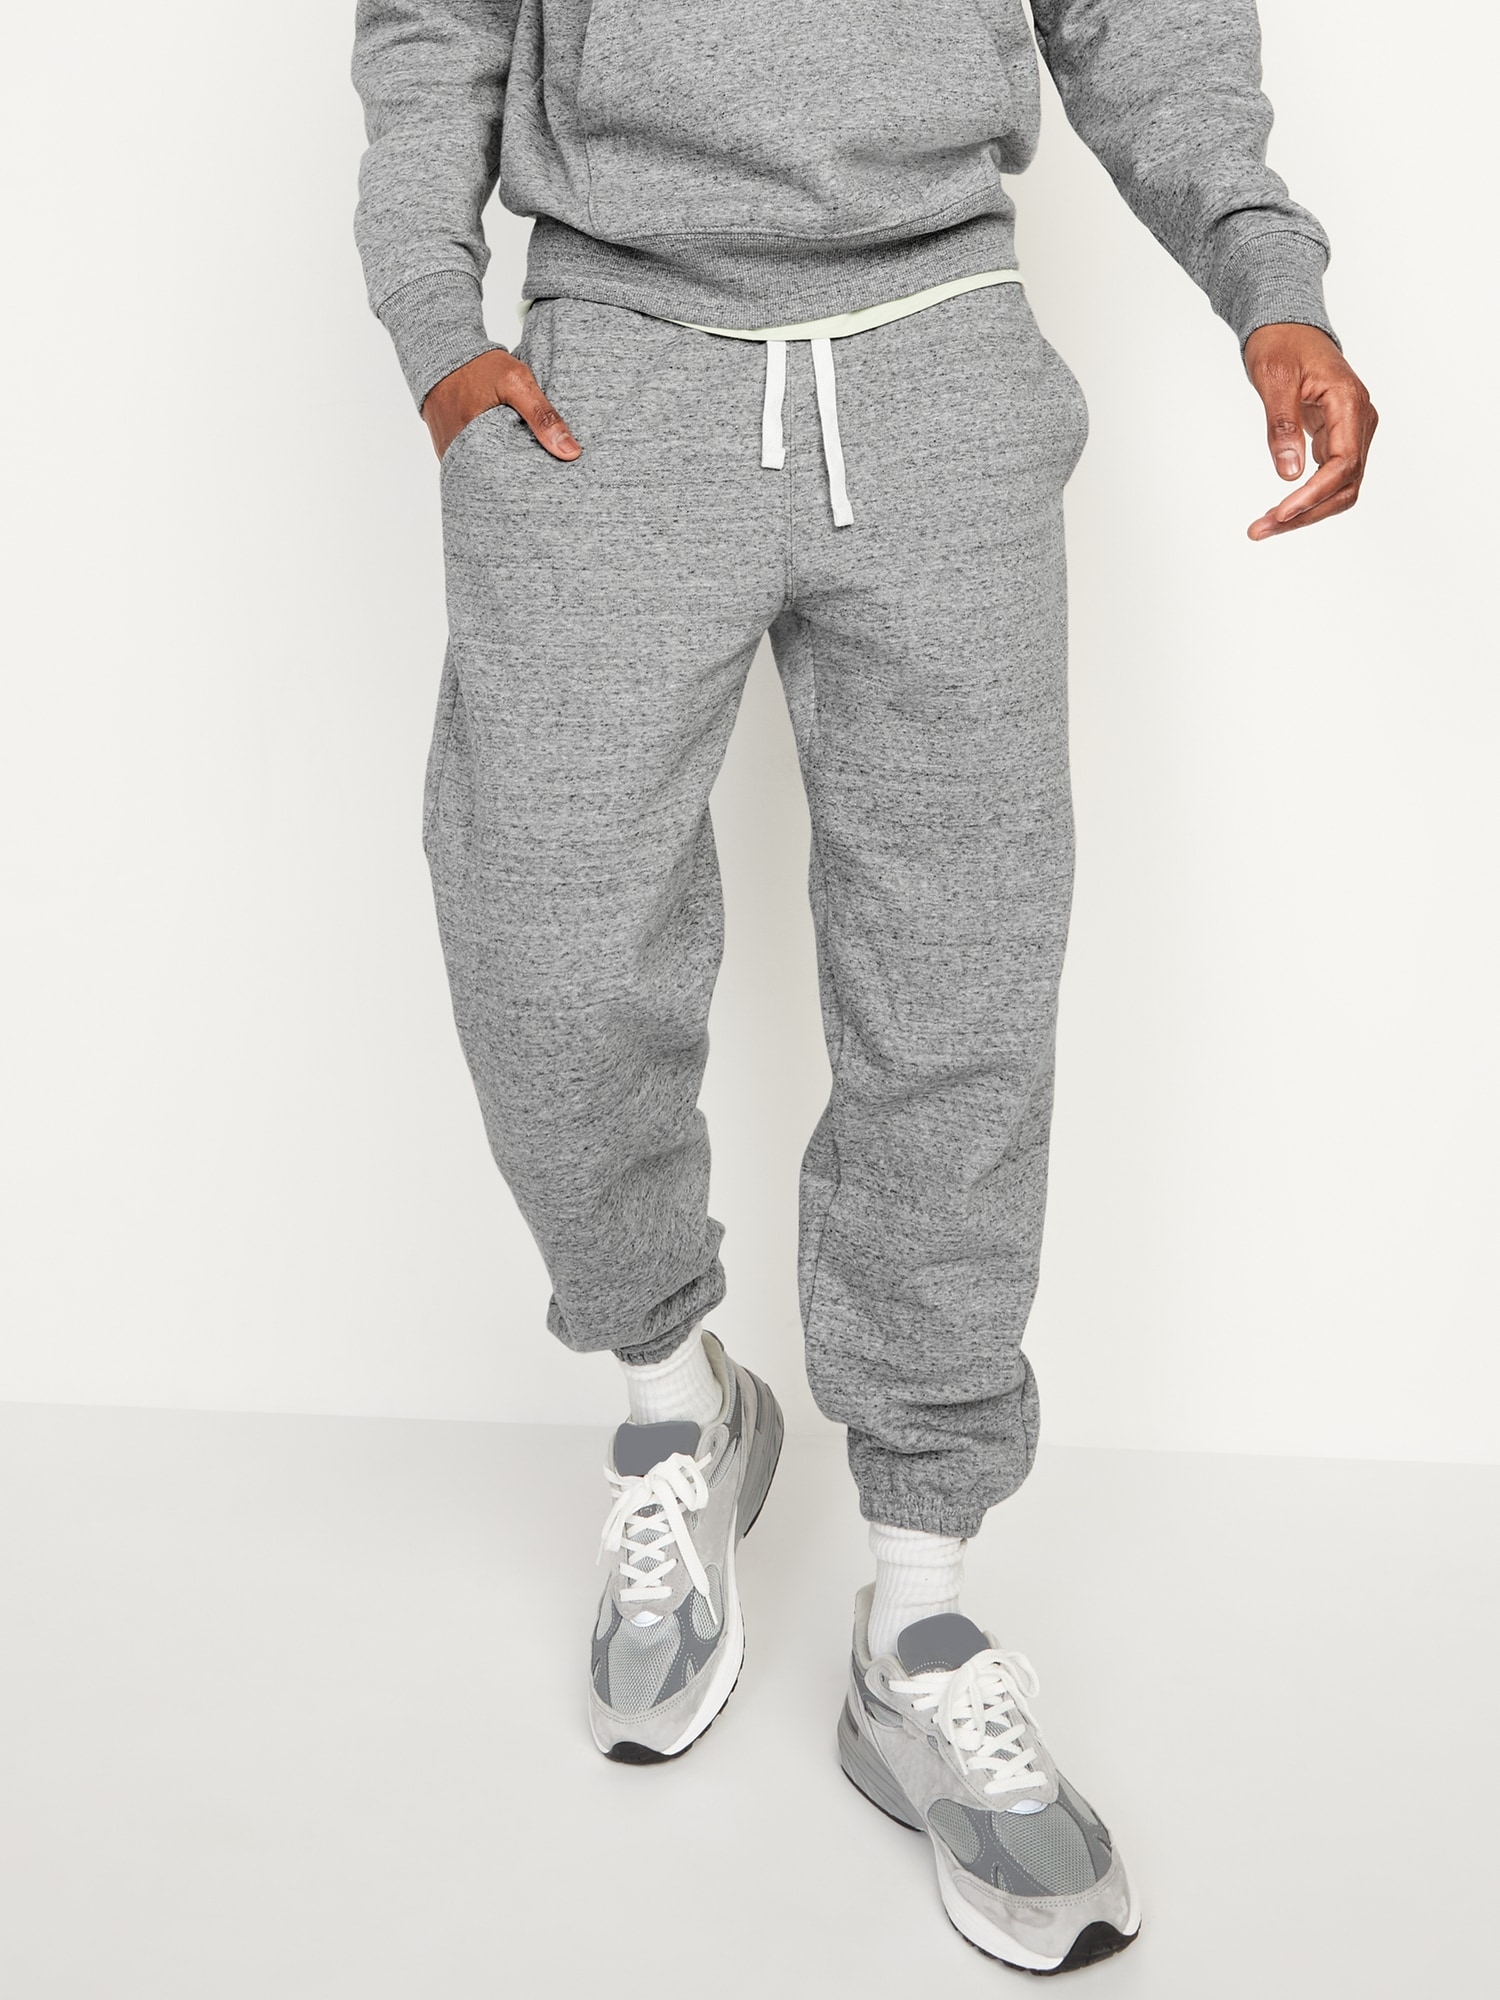 Cinched-Leg Sweatpants | Old Navy